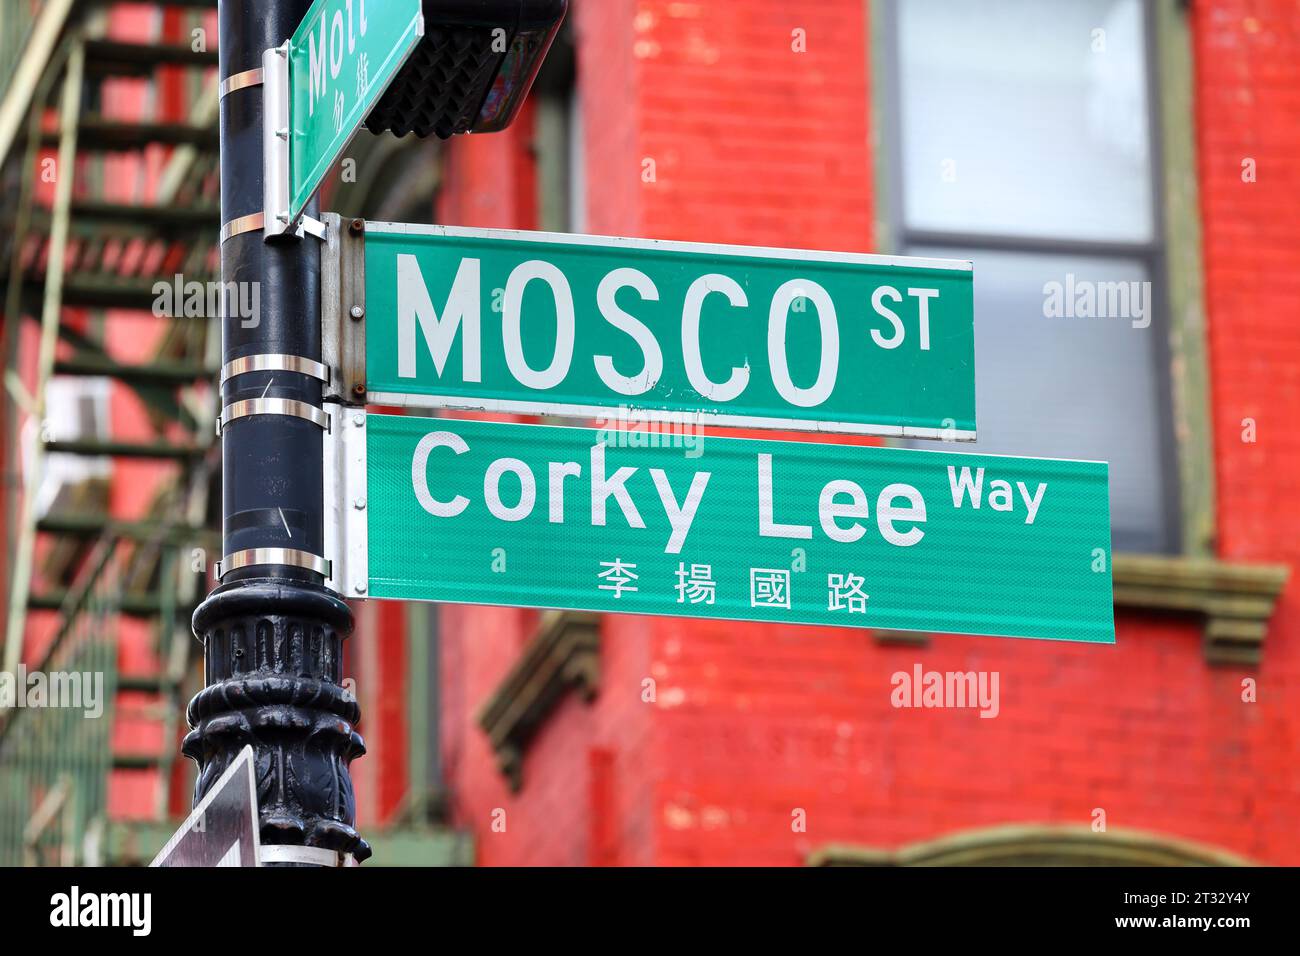 22 October 2023, New York. People celebrate Corky Lee Way 李揚國路 co-naming of Mosco St in Manhattan Chinatown. Corky Lee was a photojournalist, photographer and civil rights activist who documented Asian American history; he is sometimes referred to as the 'unofficial Asian American photographer laureate'. Mr. Lee died in 2021 from complications due to Covid-19. Mosco Street was named for Frank Mosco a community activist. 華埠, 紐約, 唐人街 Stock Photo